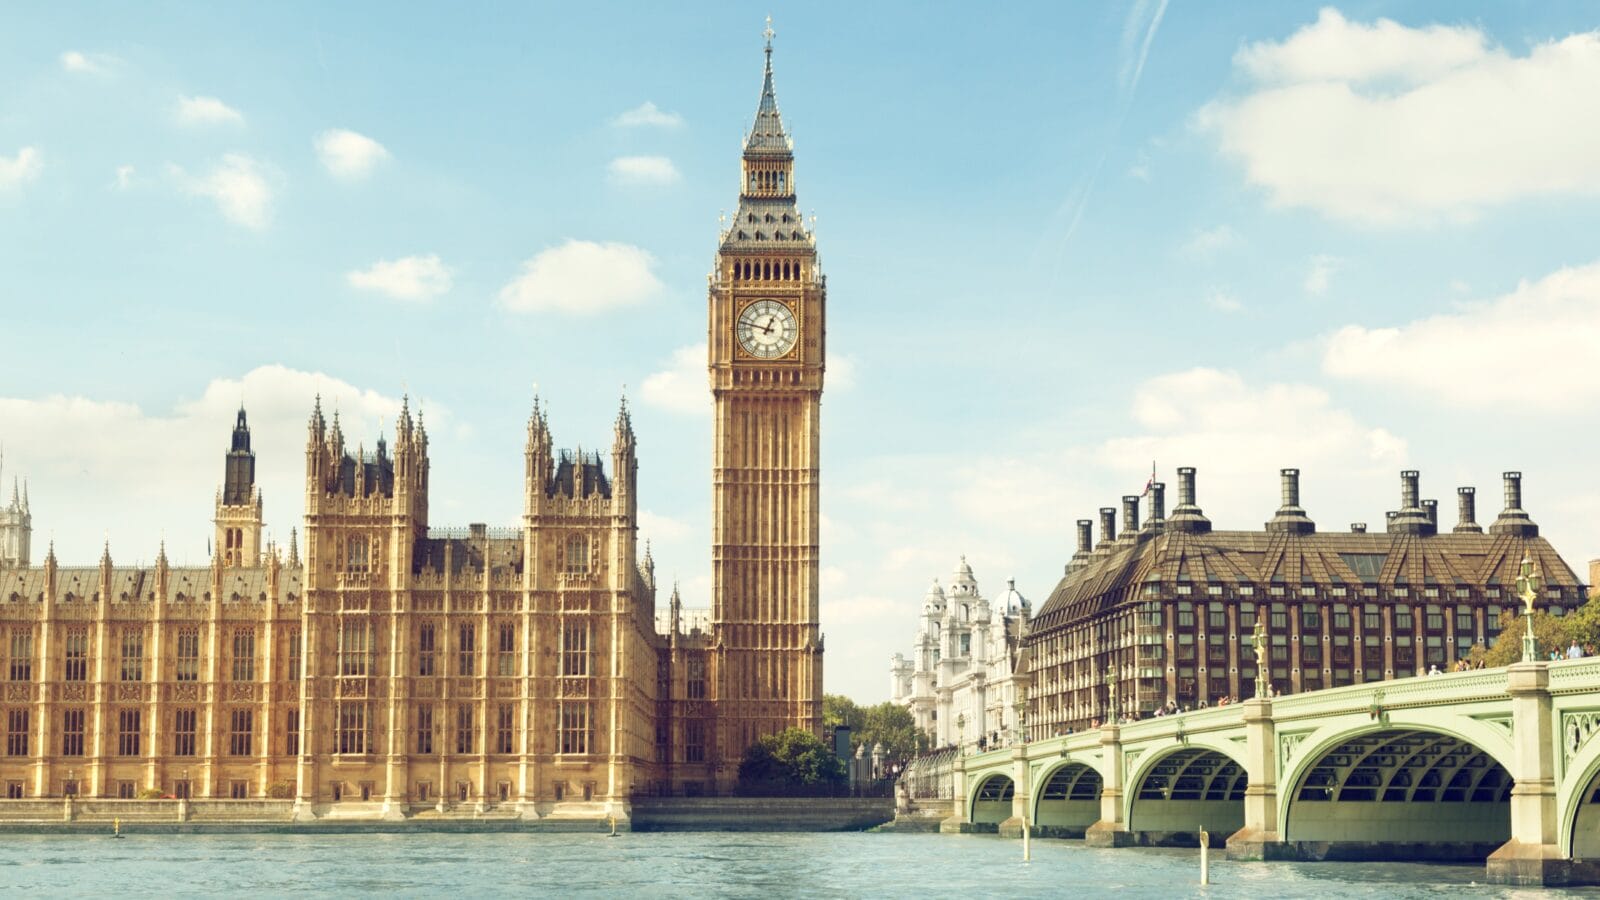 <p>London used to be the most visited European city for business travelers. In 2023, it was overtaken by Amsterdam, but it still makes the list. The UK as a whole was also overtaken by Germany as the most visited European country.</p><p>One major issue lies behind the British decline: Russian businesses were a prominent player in the London financial scene. The war with Ukraine changed that literally overnight, causing traveler numbers to the UK to take quite a hit.</p>